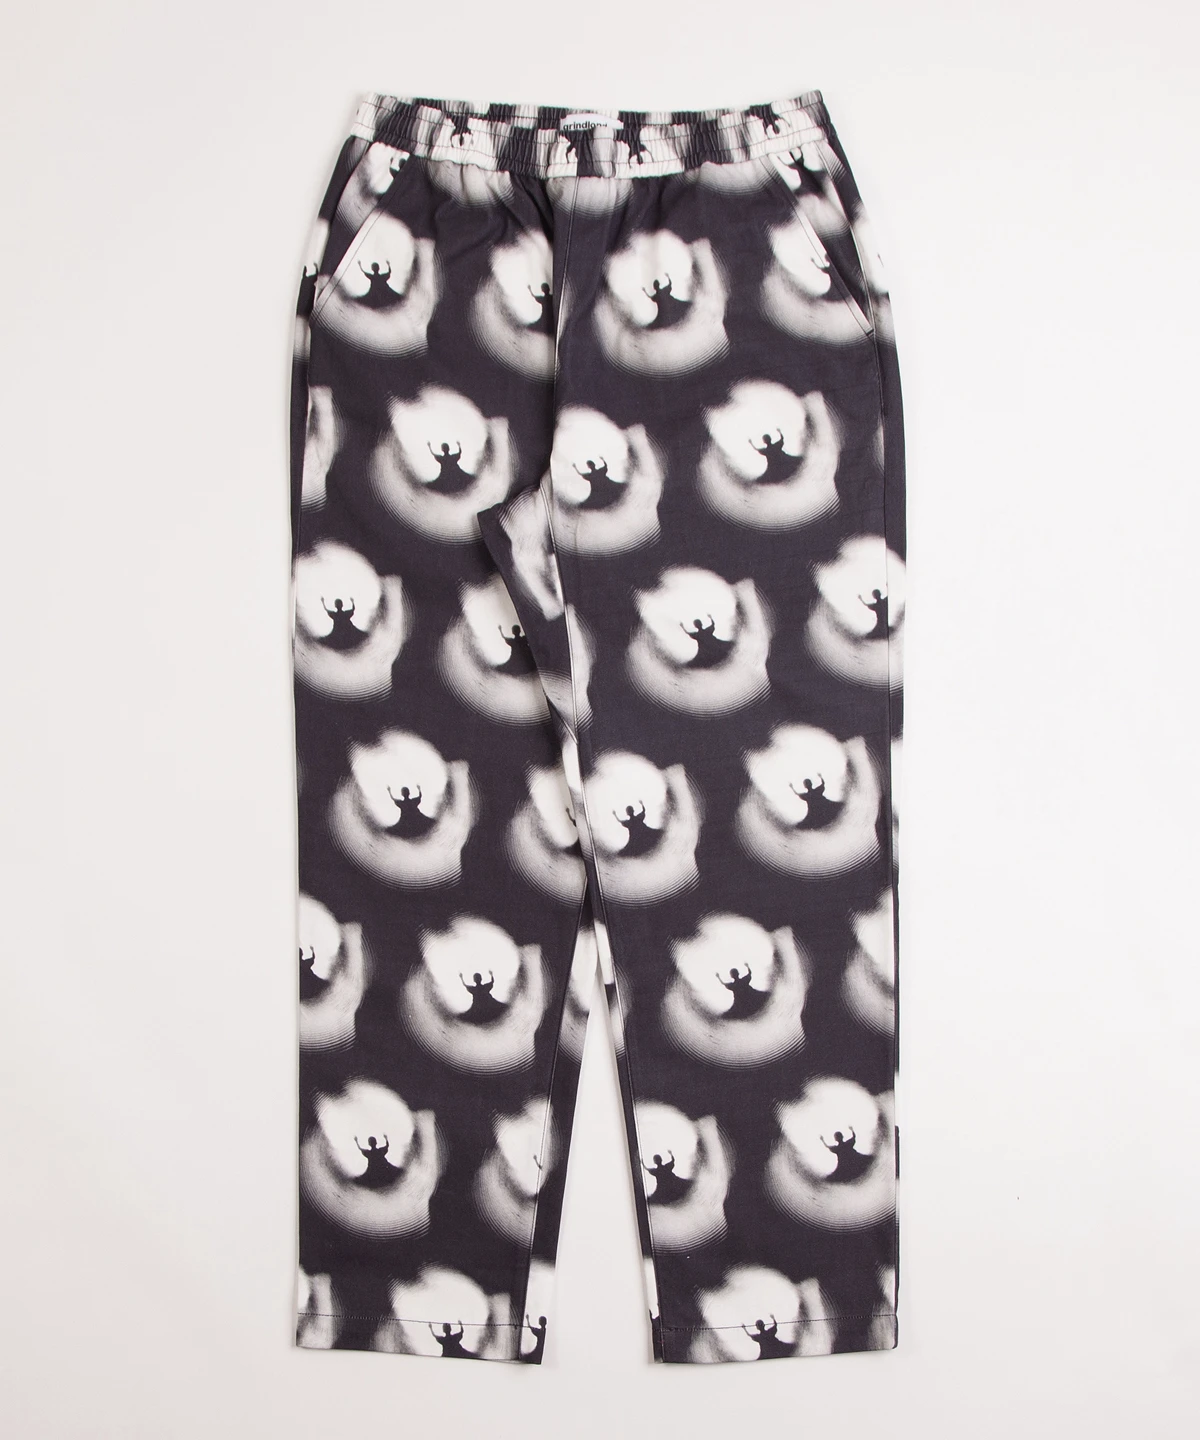 grindlondon another dimension cotton printed trouser